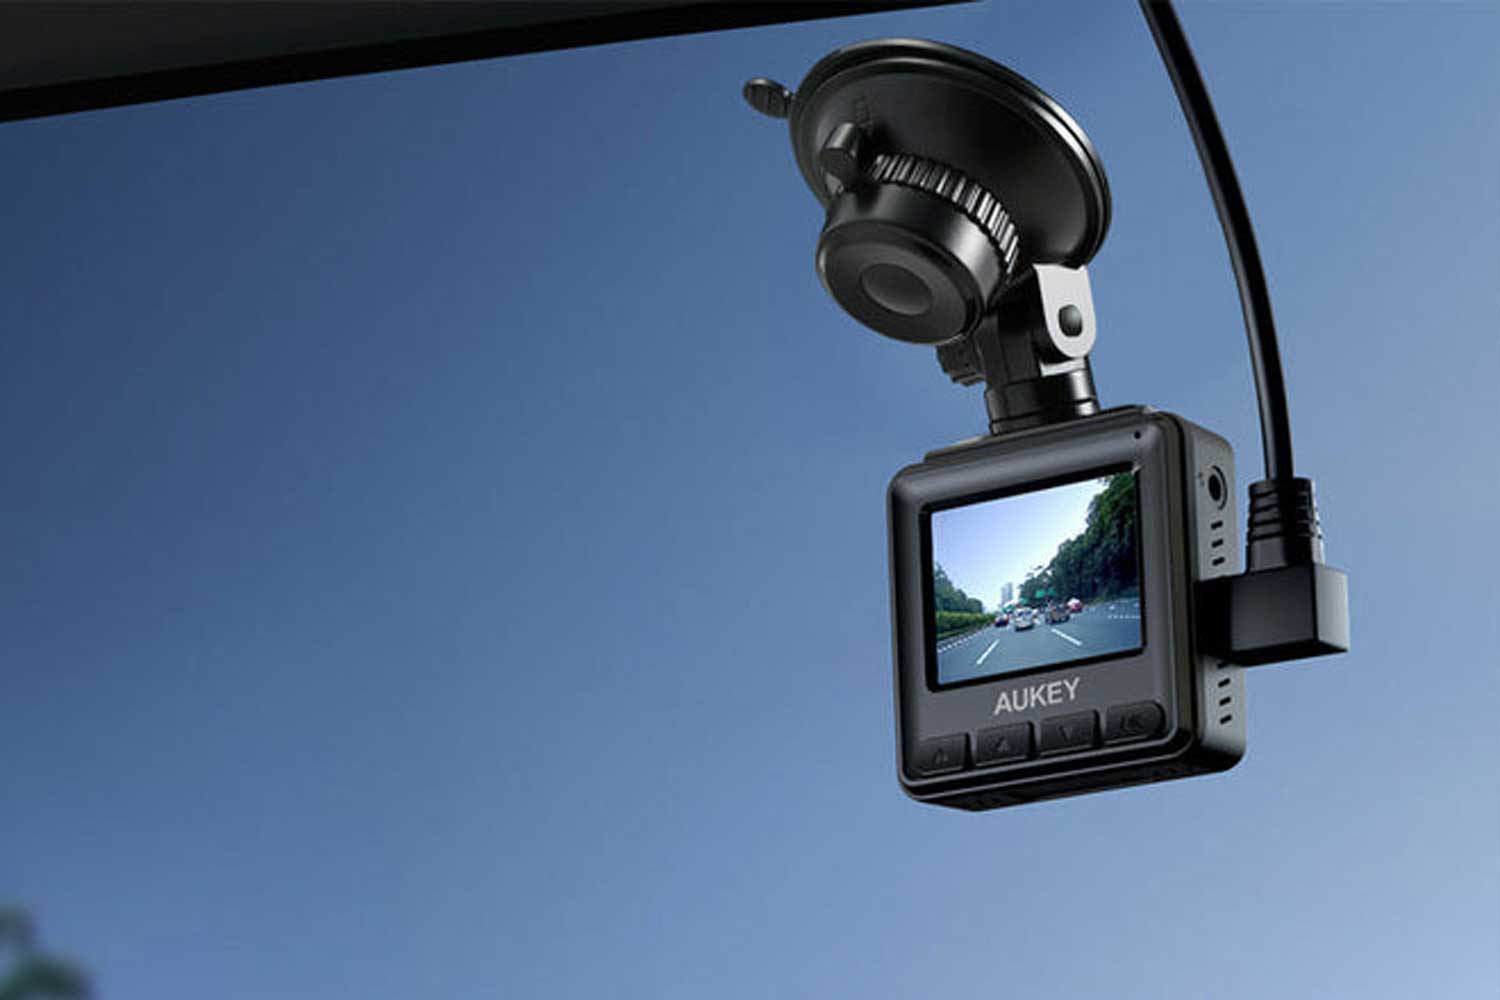 Aukey Mini Dash Cam review: Small, simple and amazingly affordable